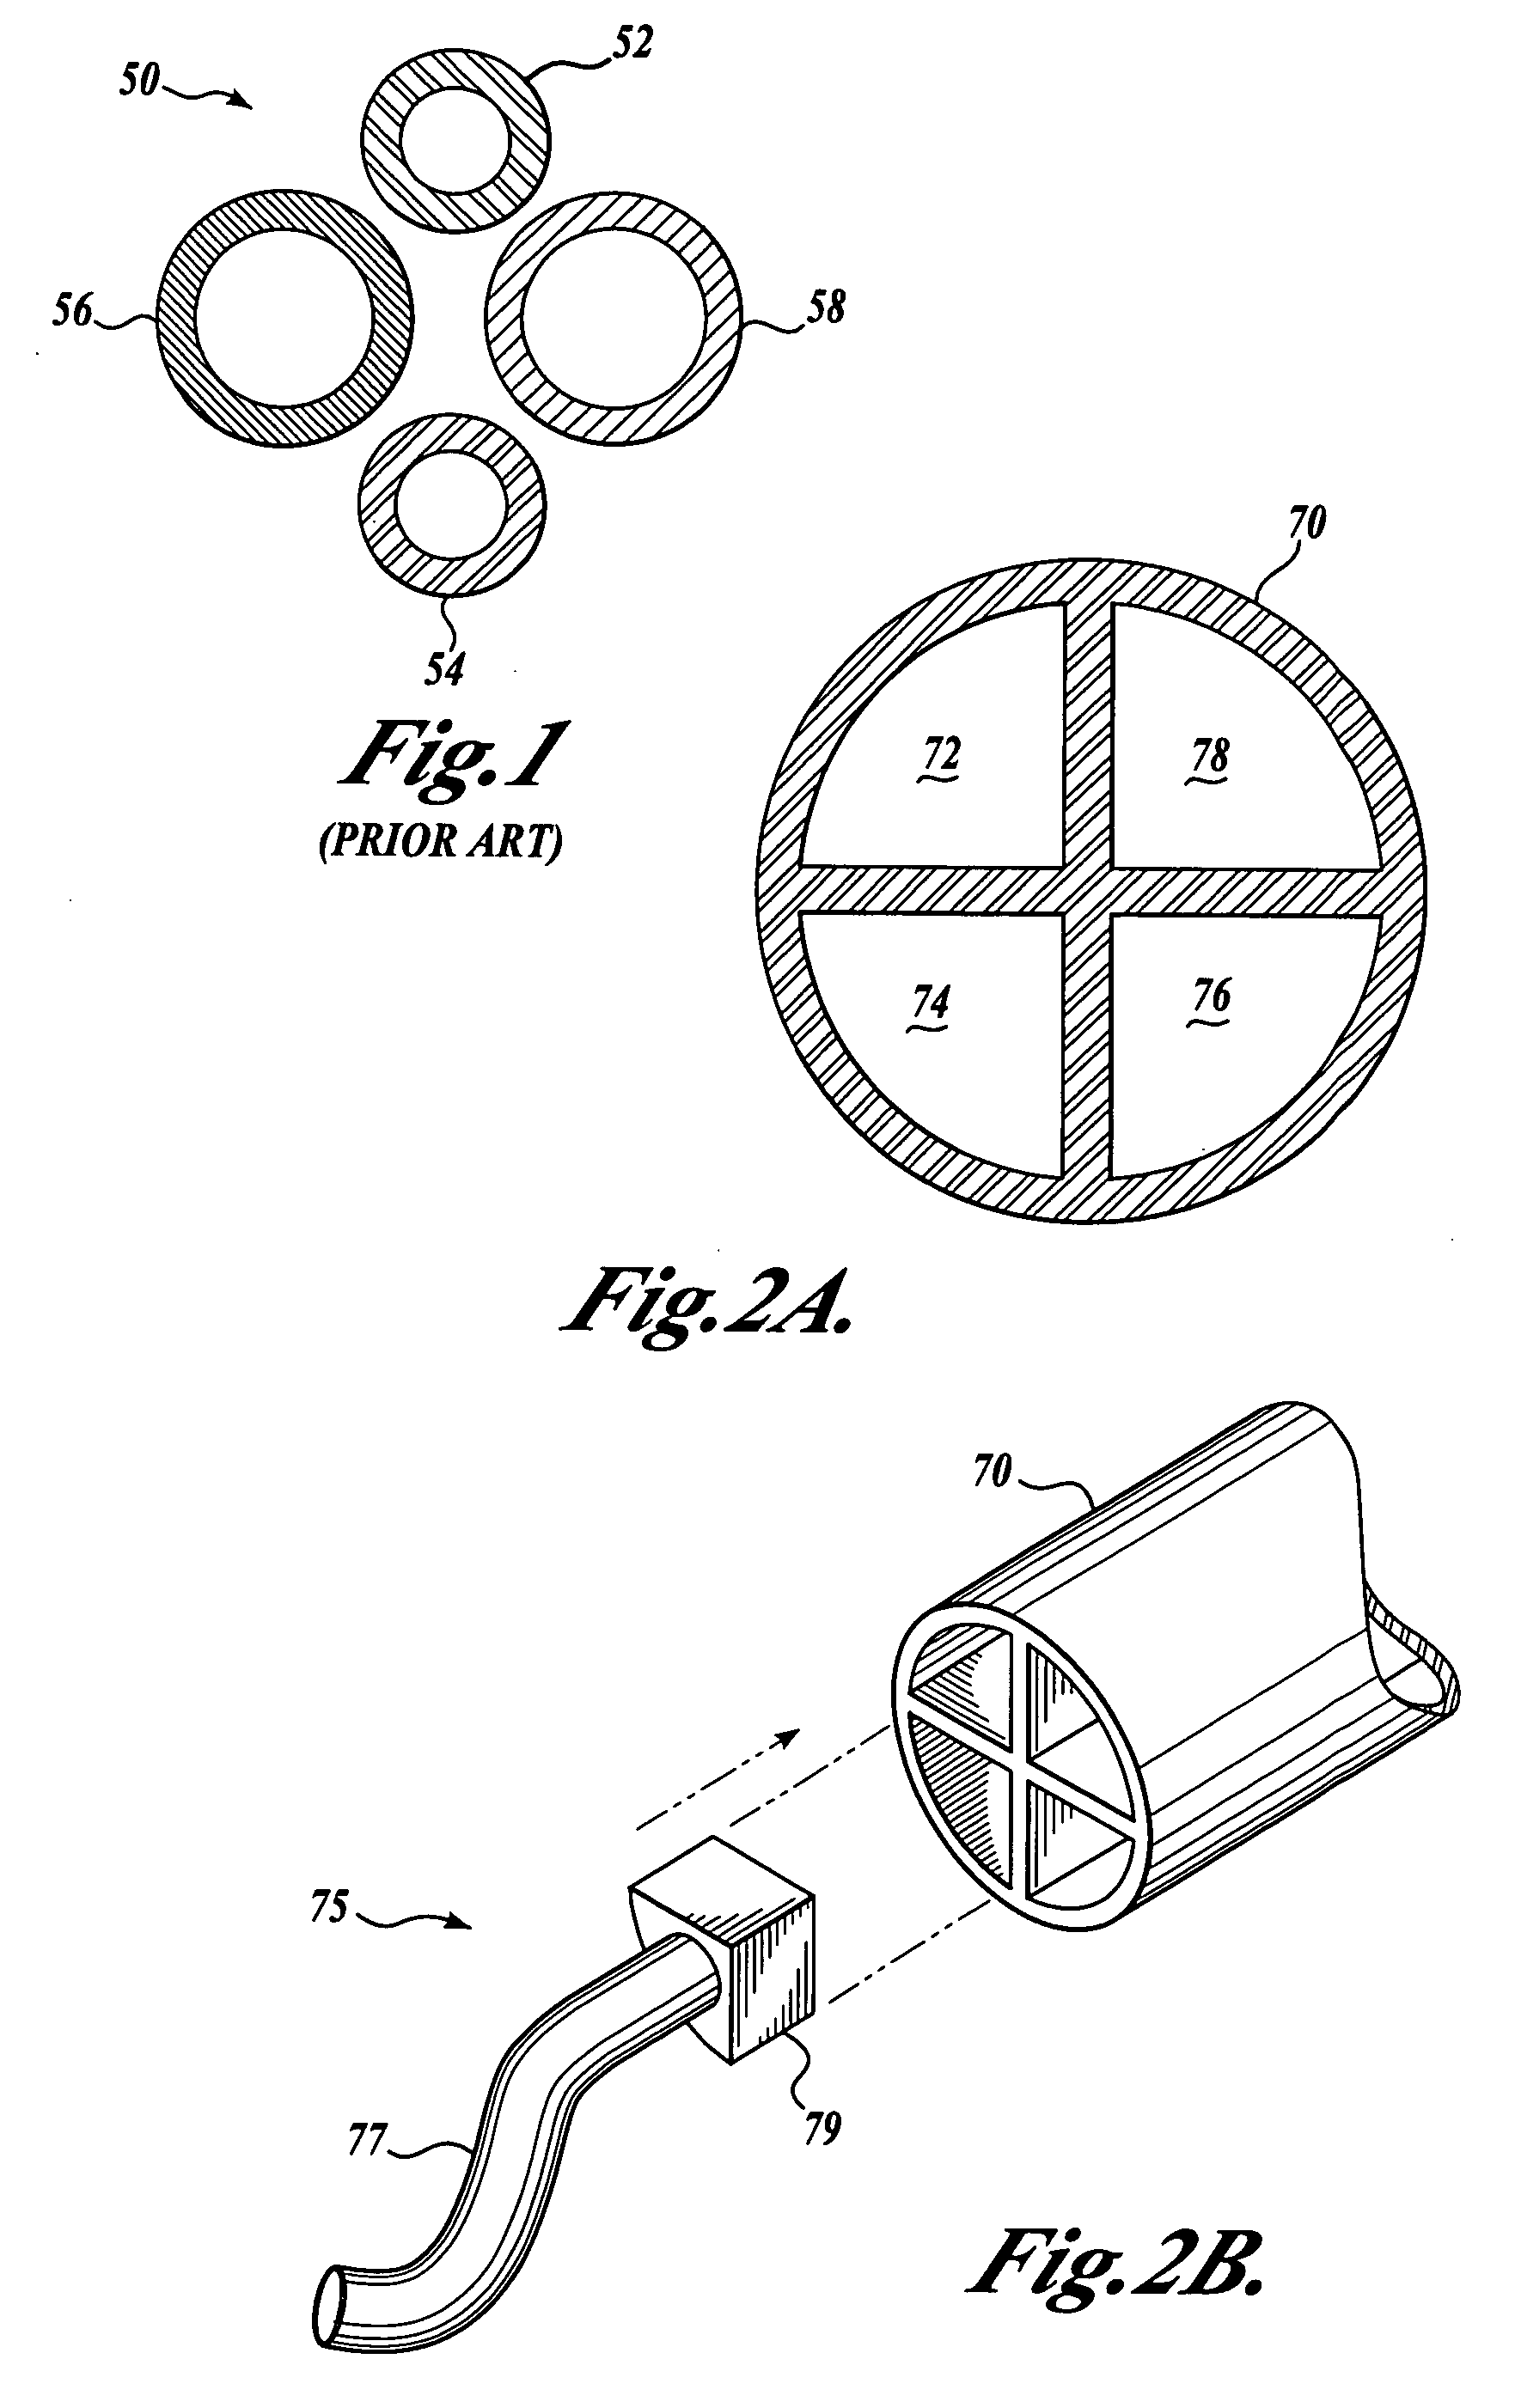 Multiple lumen assembly for use in endoscopes or other medical devices